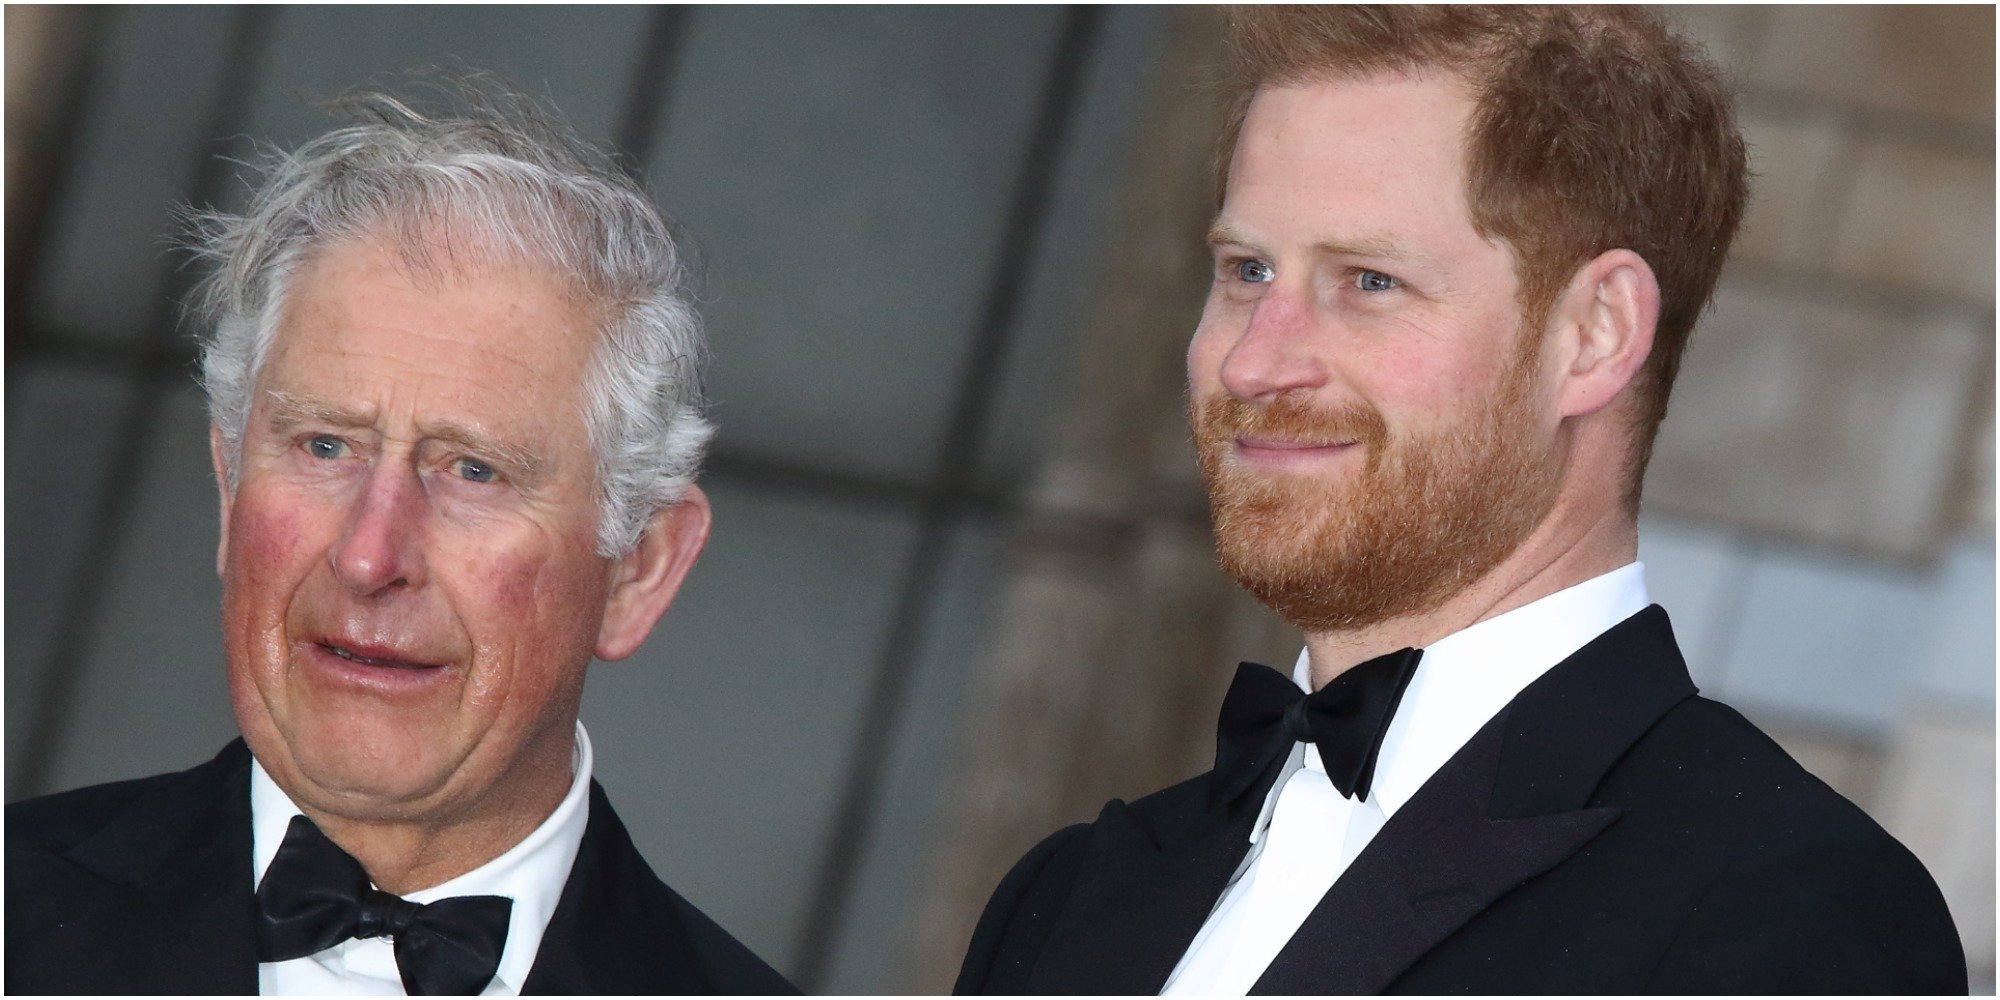 Prince Charles and Prince Harry wear tuxedos and stand alongside one another.